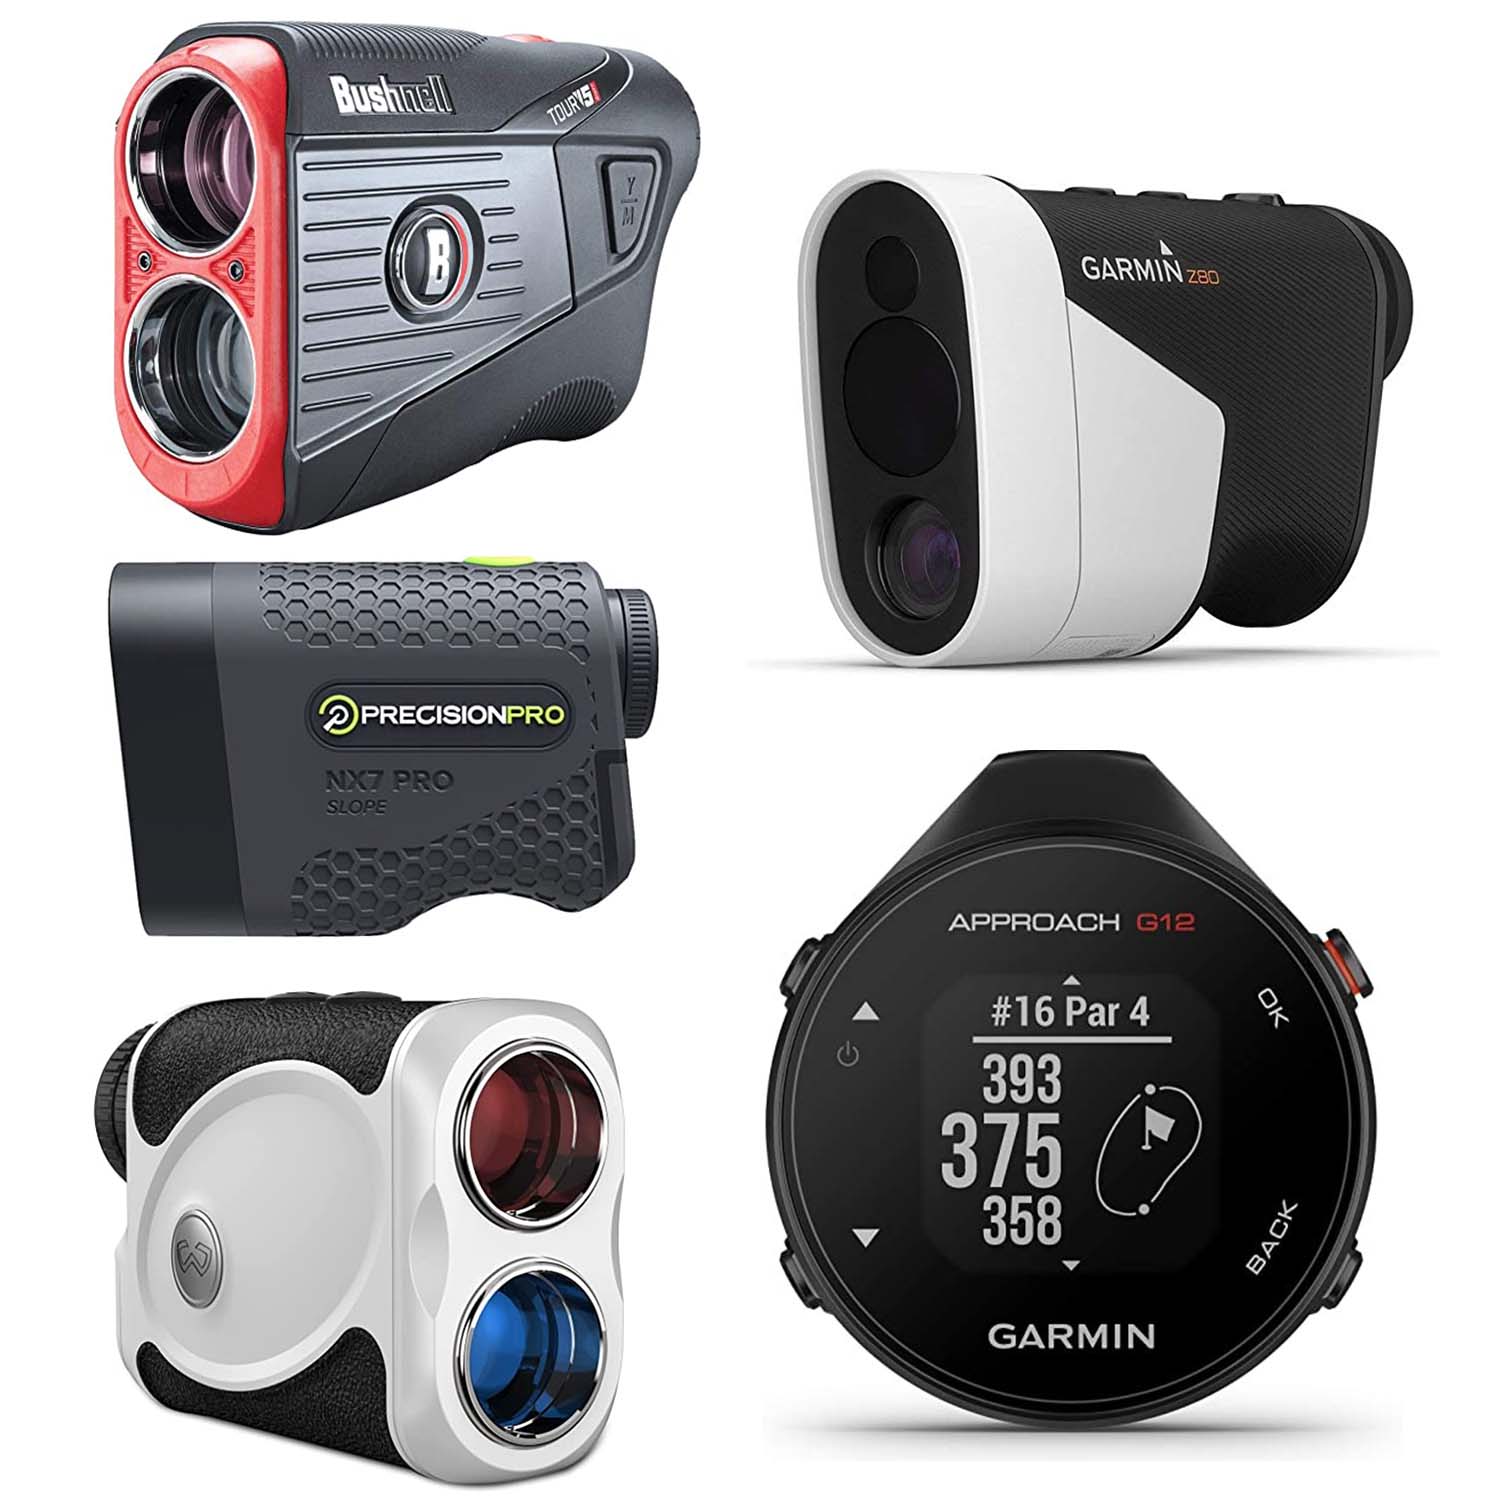 Antarctica De lucht Chemicus What to consider before purchasing a rangefinder this Black Friday | Golf  Equipment: Clubs, Balls, Bags | Golf Digest